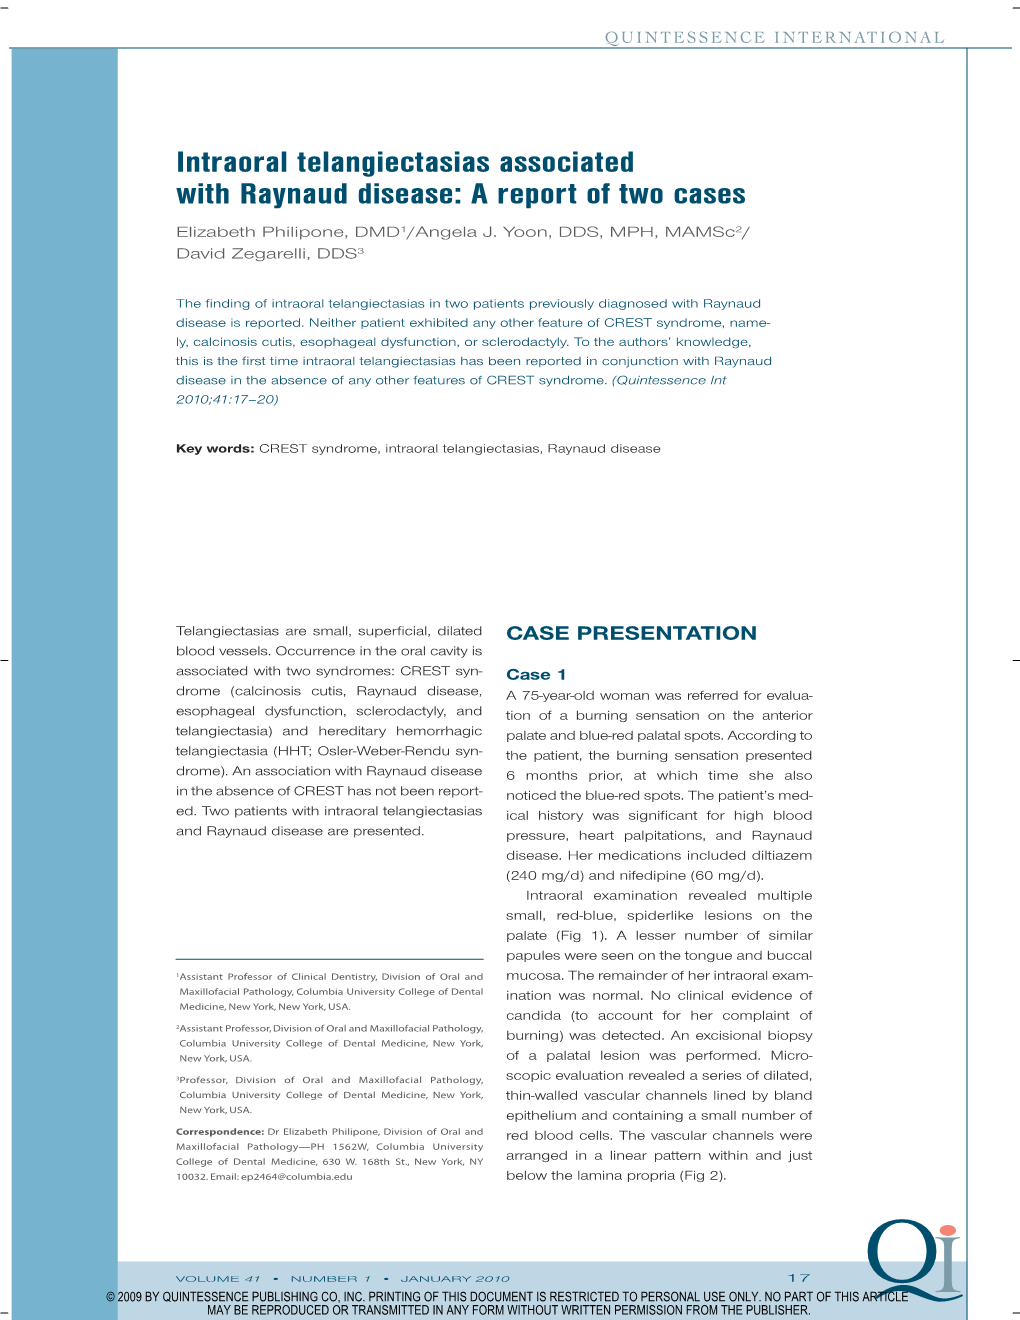 Intraoral Telangiectasias Associated with Raynaud Disease: a Report of Two Cases Elizabeth Philipone, DMD1/Angela J